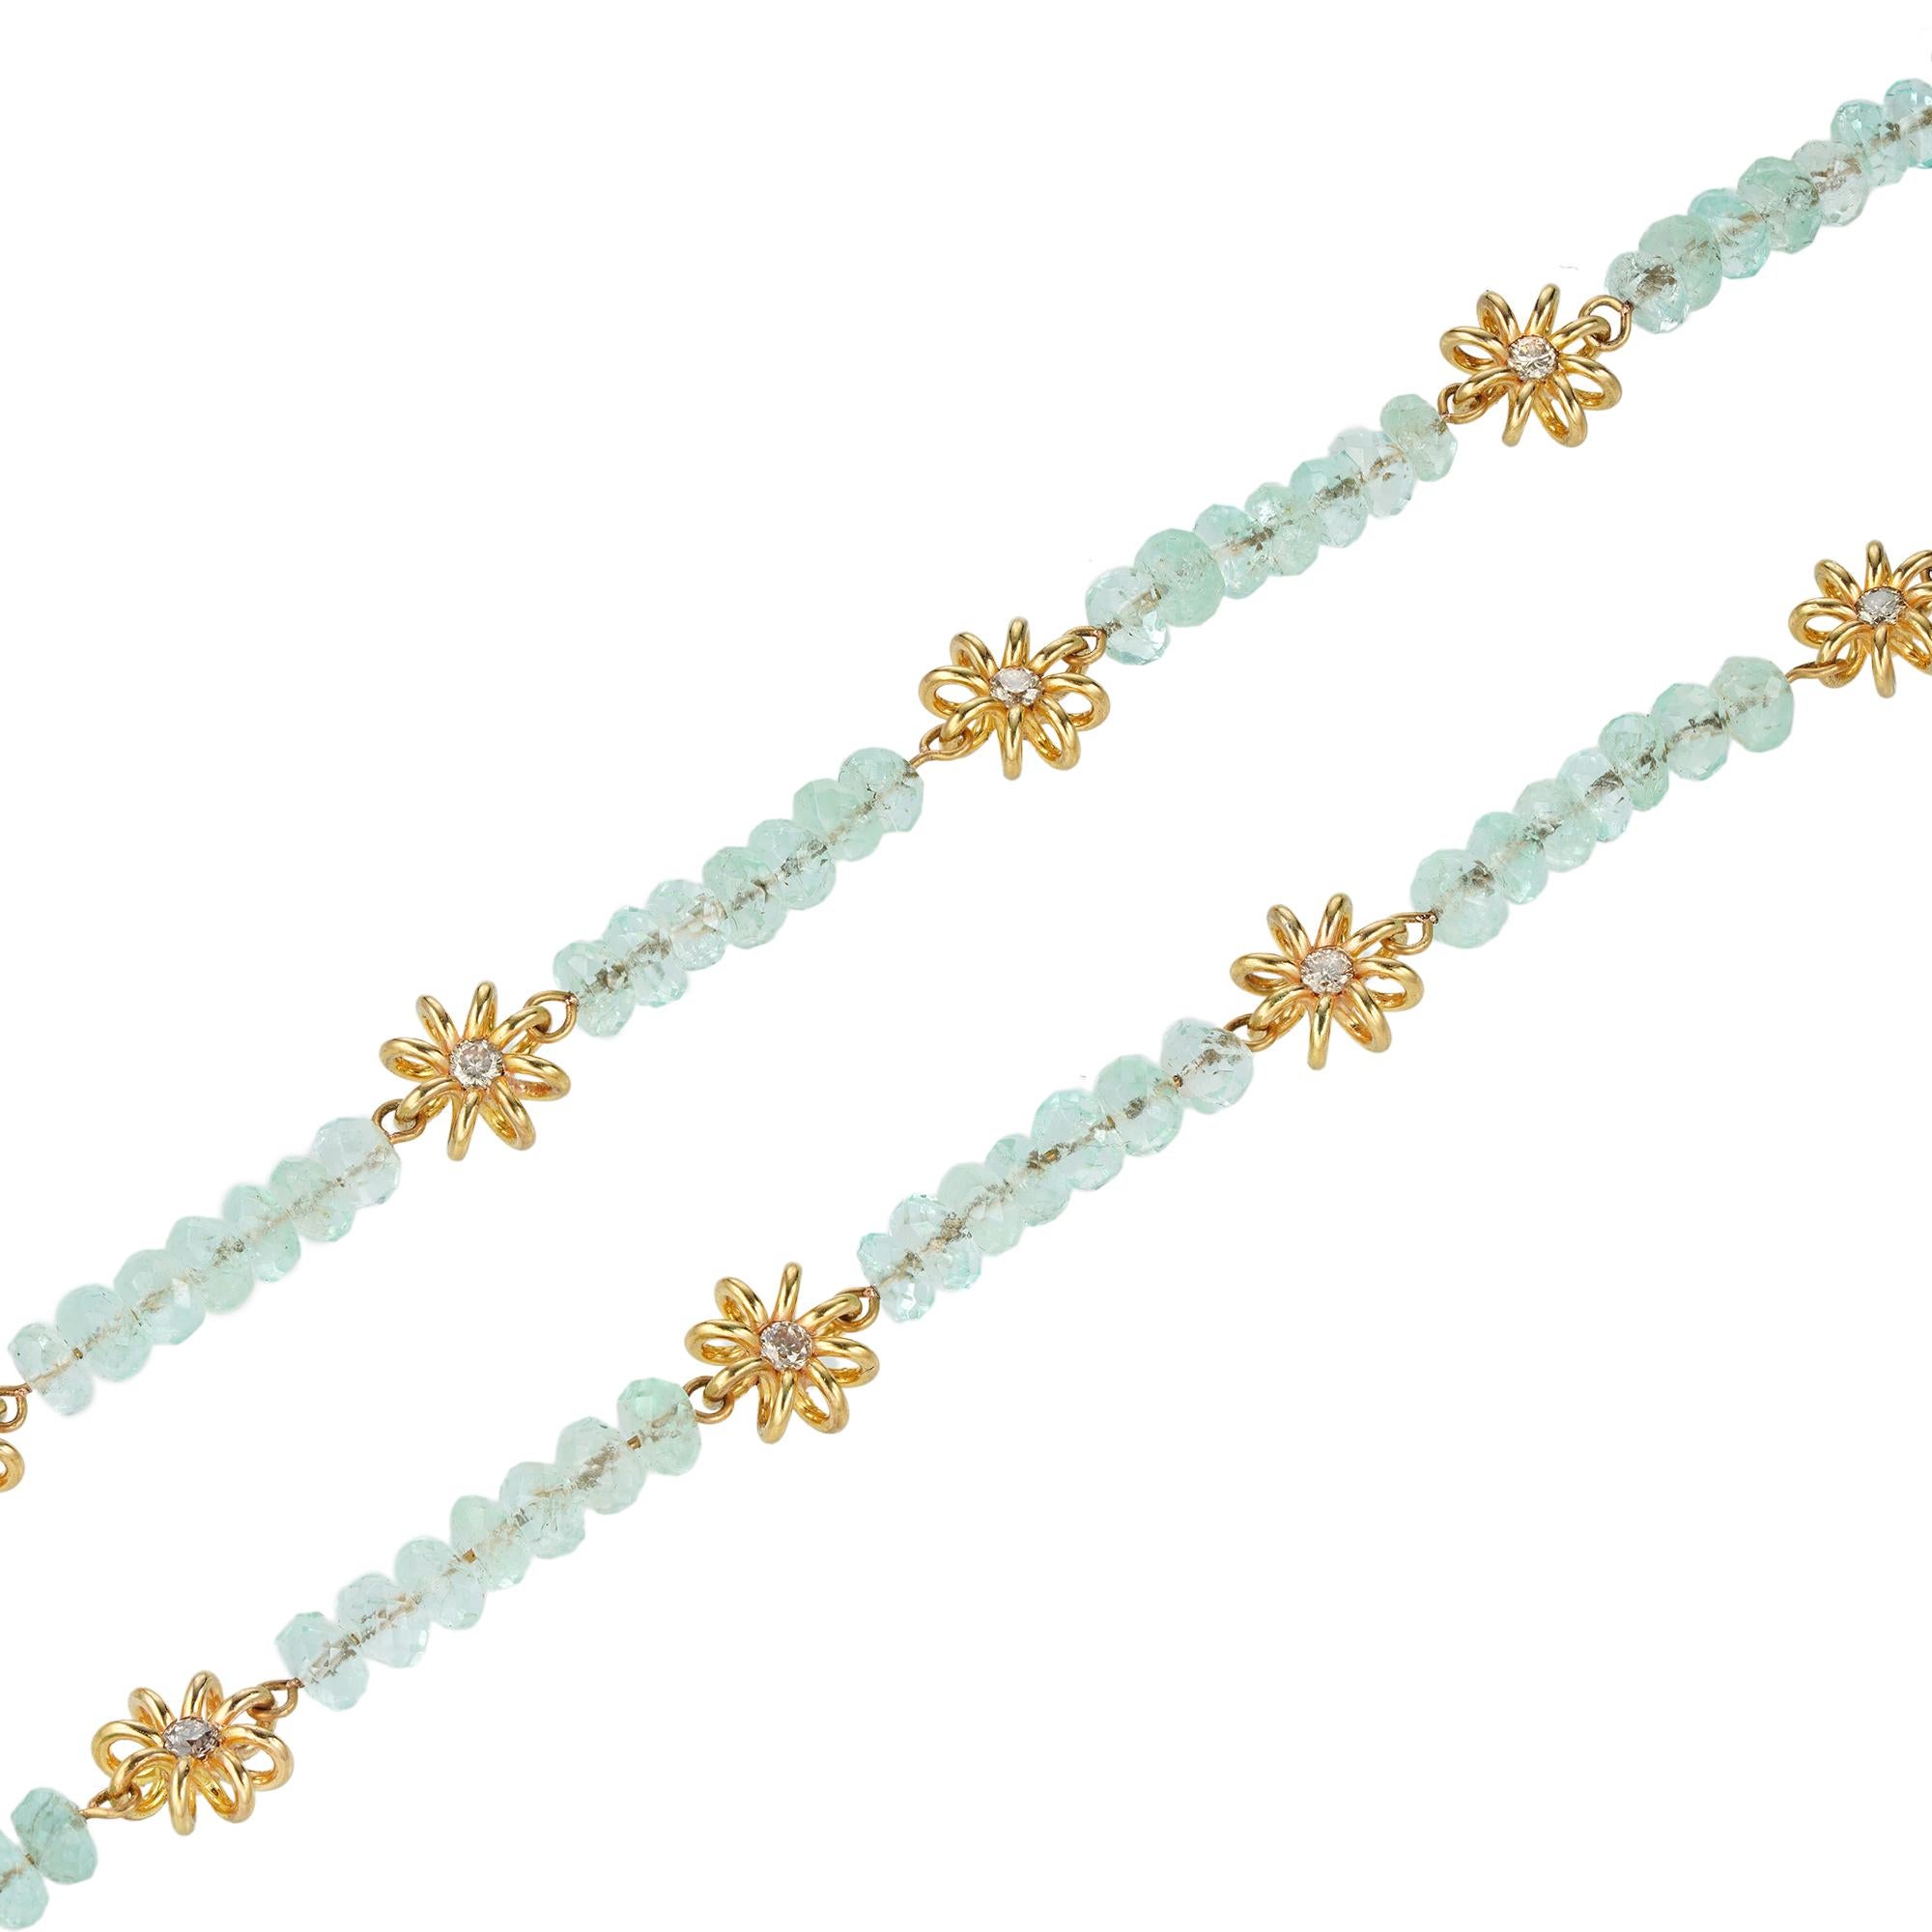 A handmade gold, diamond and green beryl necklace by Lucie Heskett-Brem the Goldweaver of Lucerne, consisting of fifteen gold flower-heads each centrally-set with a round brilliant-cut diamond, the diamonds weighing 0.59 carats in total, the